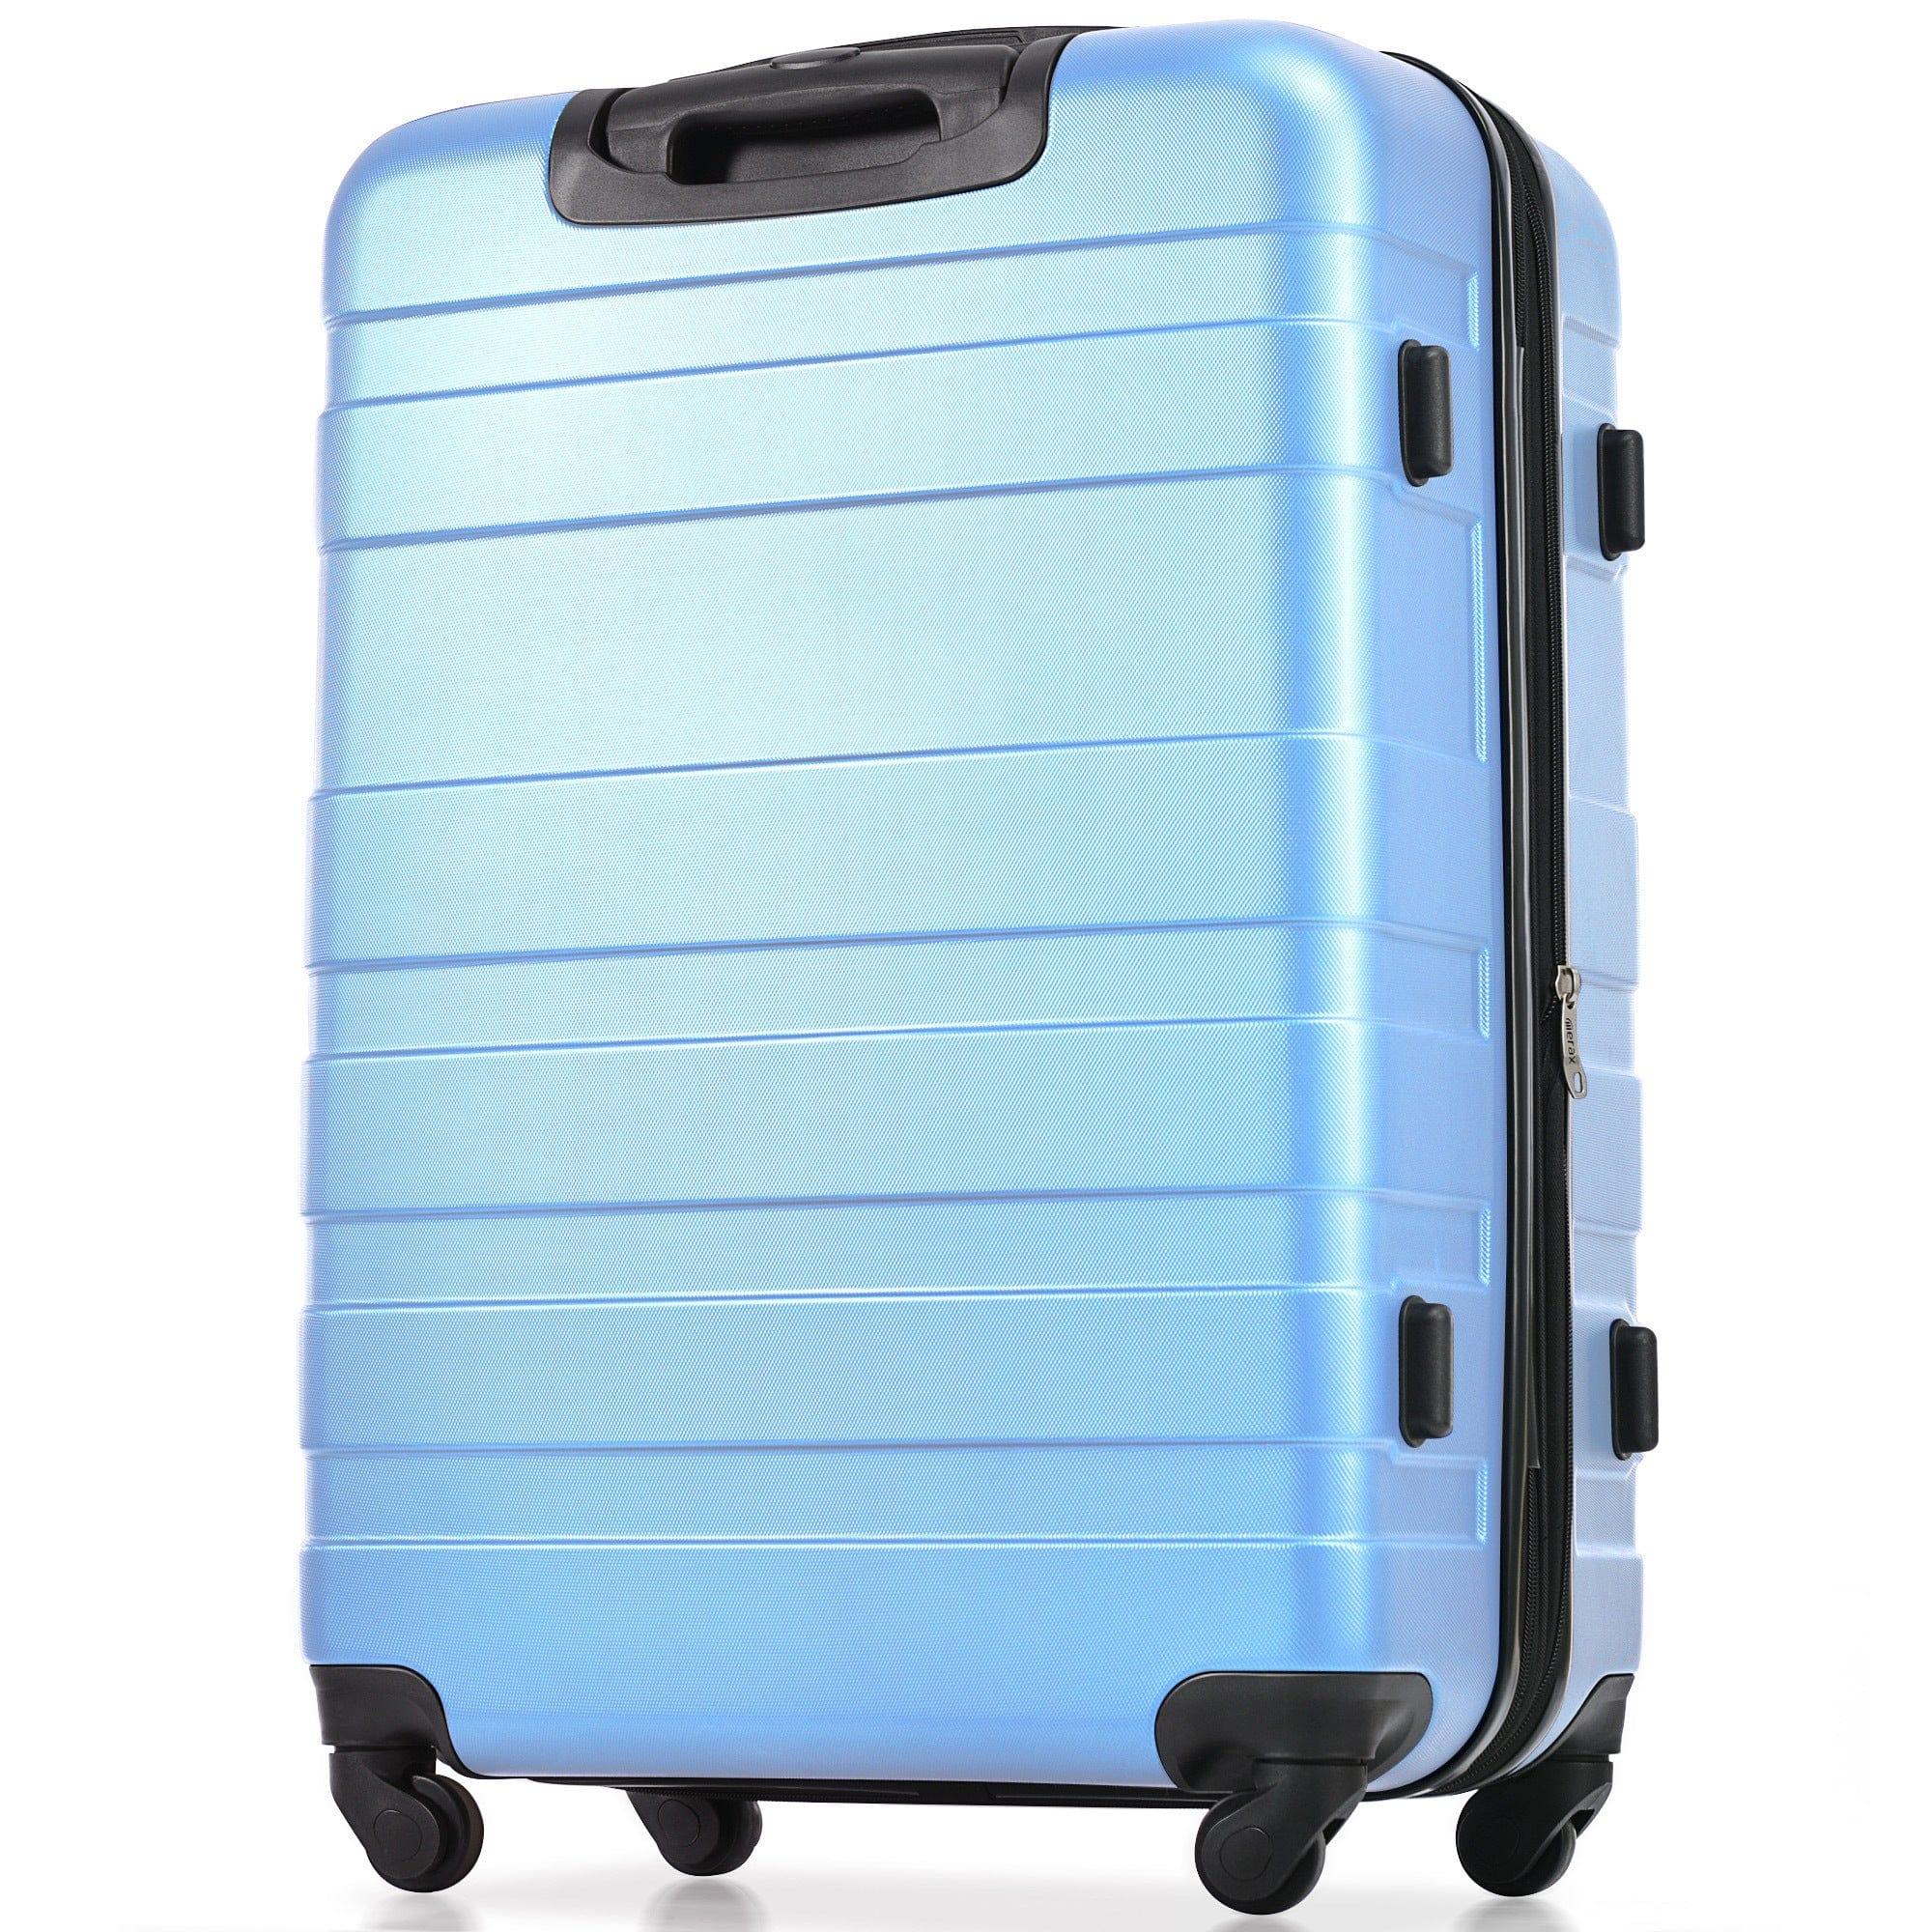 Shop Luggage Sets New Model Expandable ABS Hardshell 3pcs Clearance Luggage Hardside Lightweight Durable Suitcase sets Spinner Wheels Suitcase with TSA Lock 20''24''28''(Sky Blue) Mademoiselle Home Decor